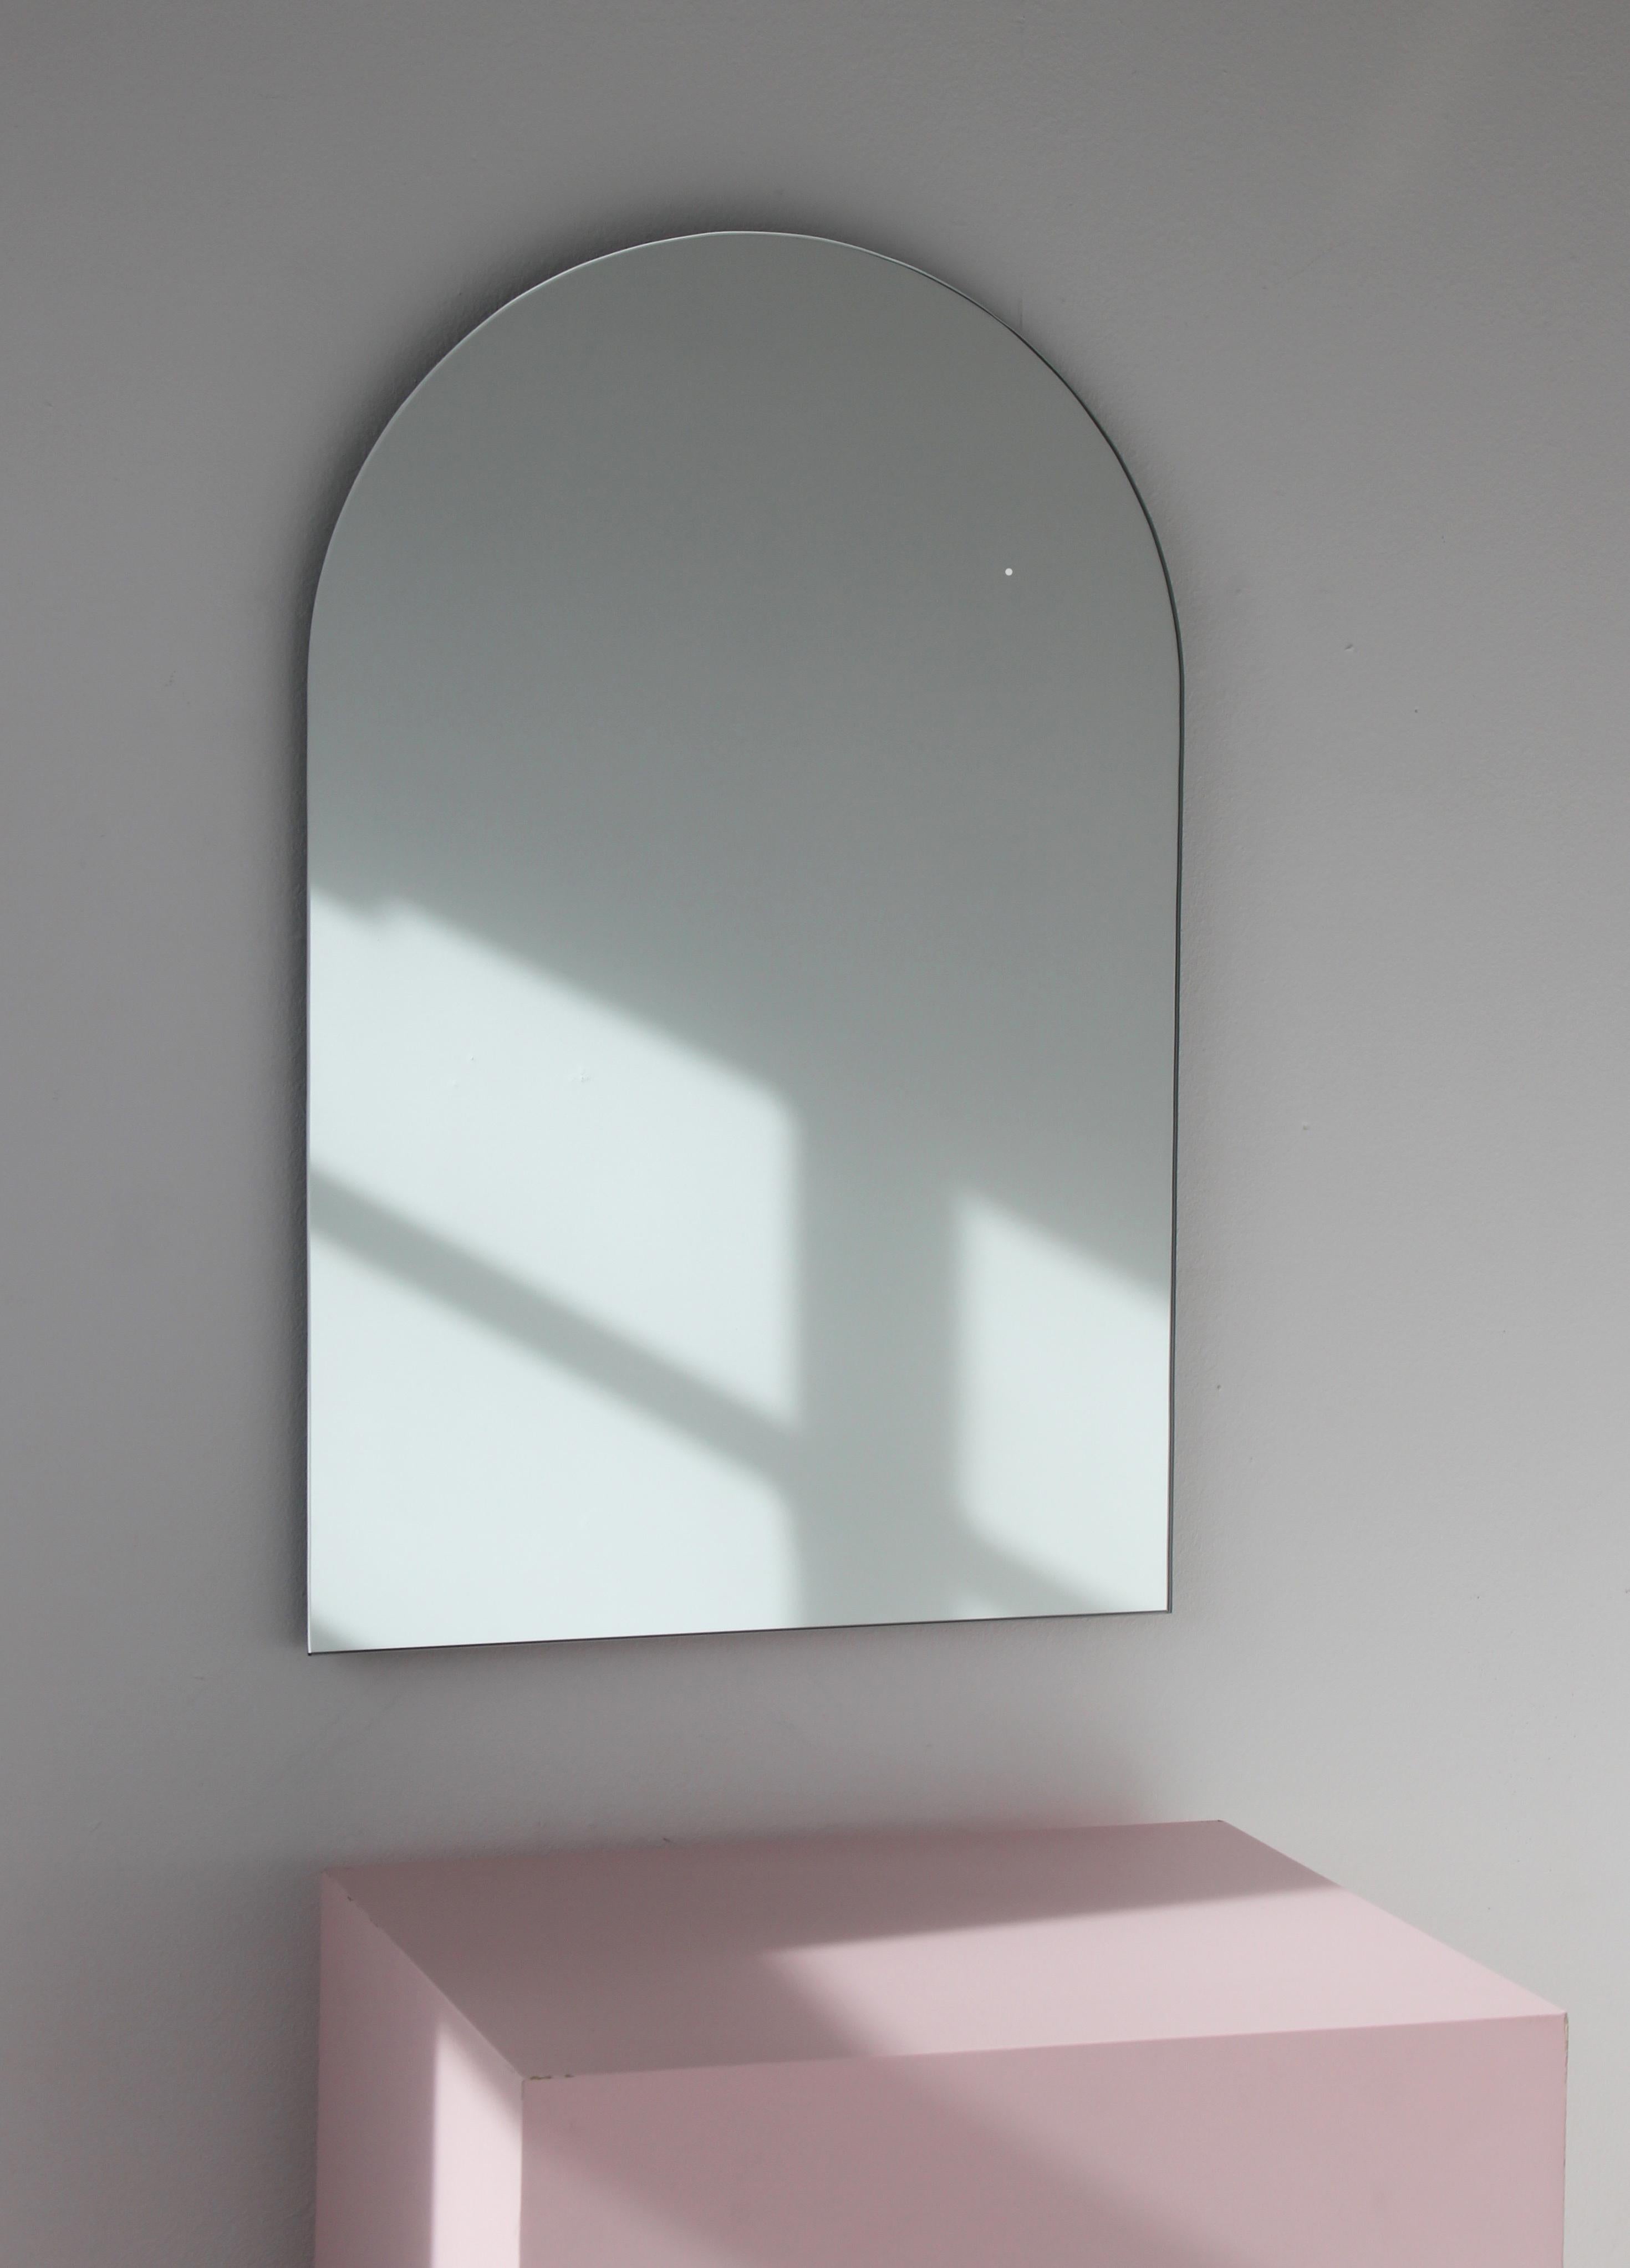 Minimalist arched frameless mirror. Quality design that ensures the mirror sits perfectly parallel to the wall. Designed and made in London, UK.

Fitted with professional plates not visible once installed for an easy and safe installation. Lined at